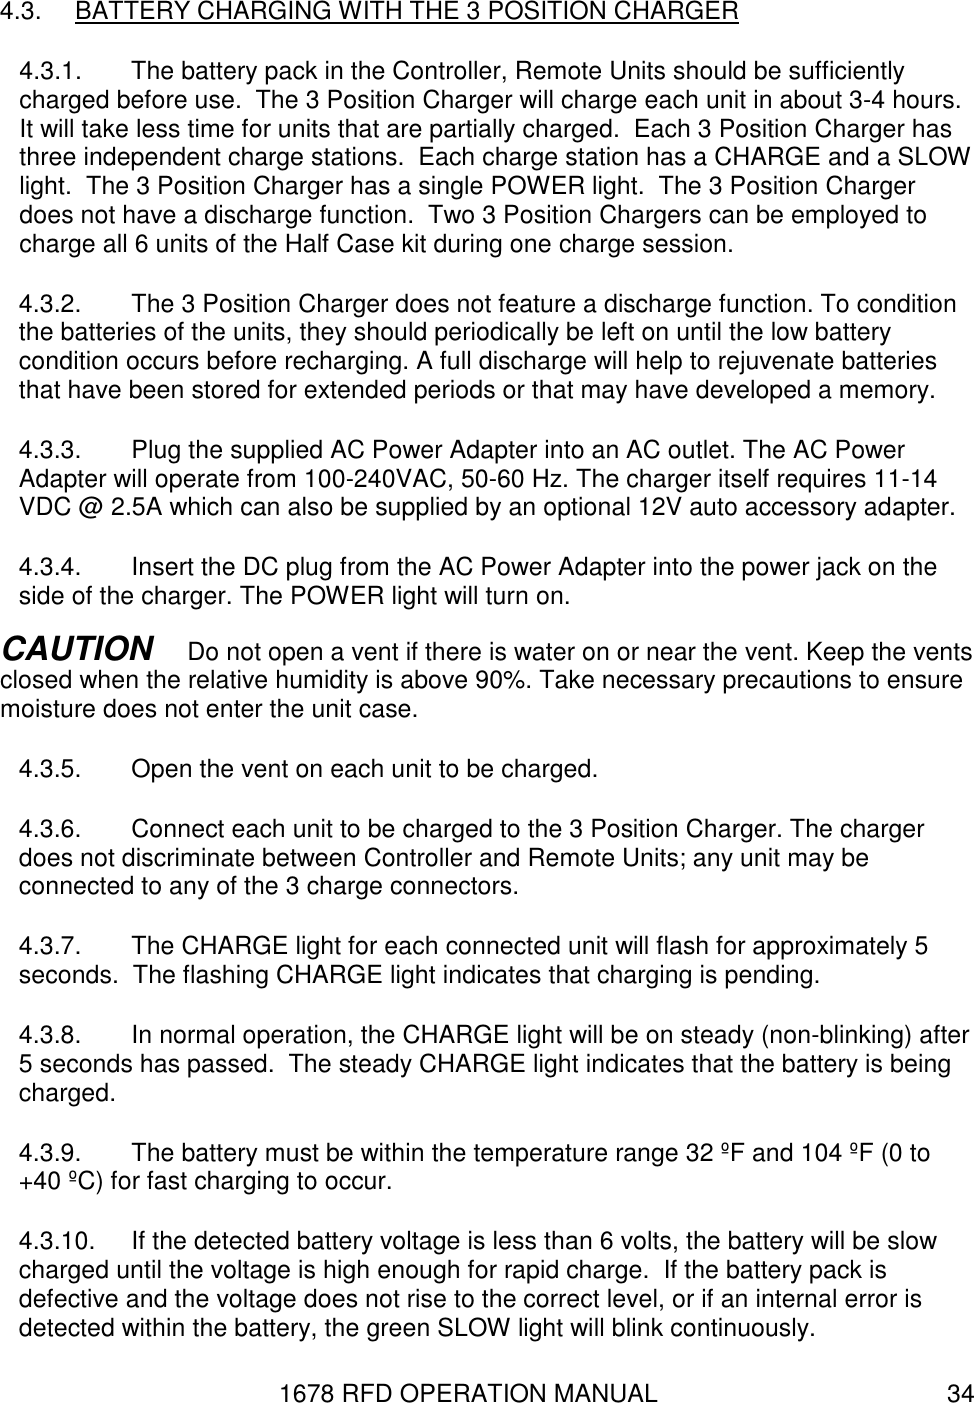 1678 RFD OPERATION MANUAL  34 4.3.  BATTERY CHARGING WITH THE 3 POSITION CHARGER 4.3.1.  The battery pack in the Controller, Remote Units should be sufficiently charged before use.  The 3 Position Charger will charge each unit in about 3-4 hours. It will take less time for units that are partially charged.  Each 3 Position Charger has three independent charge stations.  Each charge station has a CHARGE and a SLOW light.  The 3 Position Charger has a single POWER light.  The 3 Position Charger does not have a discharge function.  Two 3 Position Chargers can be employed to charge all 6 units of the Half Case kit during one charge session. 4.3.2.  The 3 Position Charger does not feature a discharge function. To condition the batteries of the units, they should periodically be left on until the low battery condition occurs before recharging. A full discharge will help to rejuvenate batteries that have been stored for extended periods or that may have developed a memory. 4.3.3.  Plug the supplied AC Power Adapter into an AC outlet. The AC Power Adapter will operate from 100-240VAC, 50-60 Hz. The charger itself requires 11-14 VDC @ 2.5A which can also be supplied by an optional 12V auto accessory adapter.  4.3.4.  Insert the DC plug from the AC Power Adapter into the power jack on the side of the charger. The POWER light will turn on. CAUTION   Do not open a vent if there is water on or near the vent. Keep the vents closed when the relative humidity is above 90%. Take necessary precautions to ensure moisture does not enter the unit case. 4.3.5.  Open the vent on each unit to be charged.  4.3.6.  Connect each unit to be charged to the 3 Position Charger. The charger does not discriminate between Controller and Remote Units; any unit may be connected to any of the 3 charge connectors. 4.3.7.  The CHARGE light for each connected unit will flash for approximately 5 seconds.  The flashing CHARGE light indicates that charging is pending. 4.3.8.  In normal operation, the CHARGE light will be on steady (non-blinking) after 5 seconds has passed.  The steady CHARGE light indicates that the battery is being charged. 4.3.9.  The battery must be within the temperature range 32 ºF and 104 ºF (0 to +40 ºC) for fast charging to occur.   4.3.10.  If the detected battery voltage is less than 6 volts, the battery will be slow charged until the voltage is high enough for rapid charge.  If the battery pack is defective and the voltage does not rise to the correct level, or if an internal error is detected within the battery, the green SLOW light will blink continuously. 